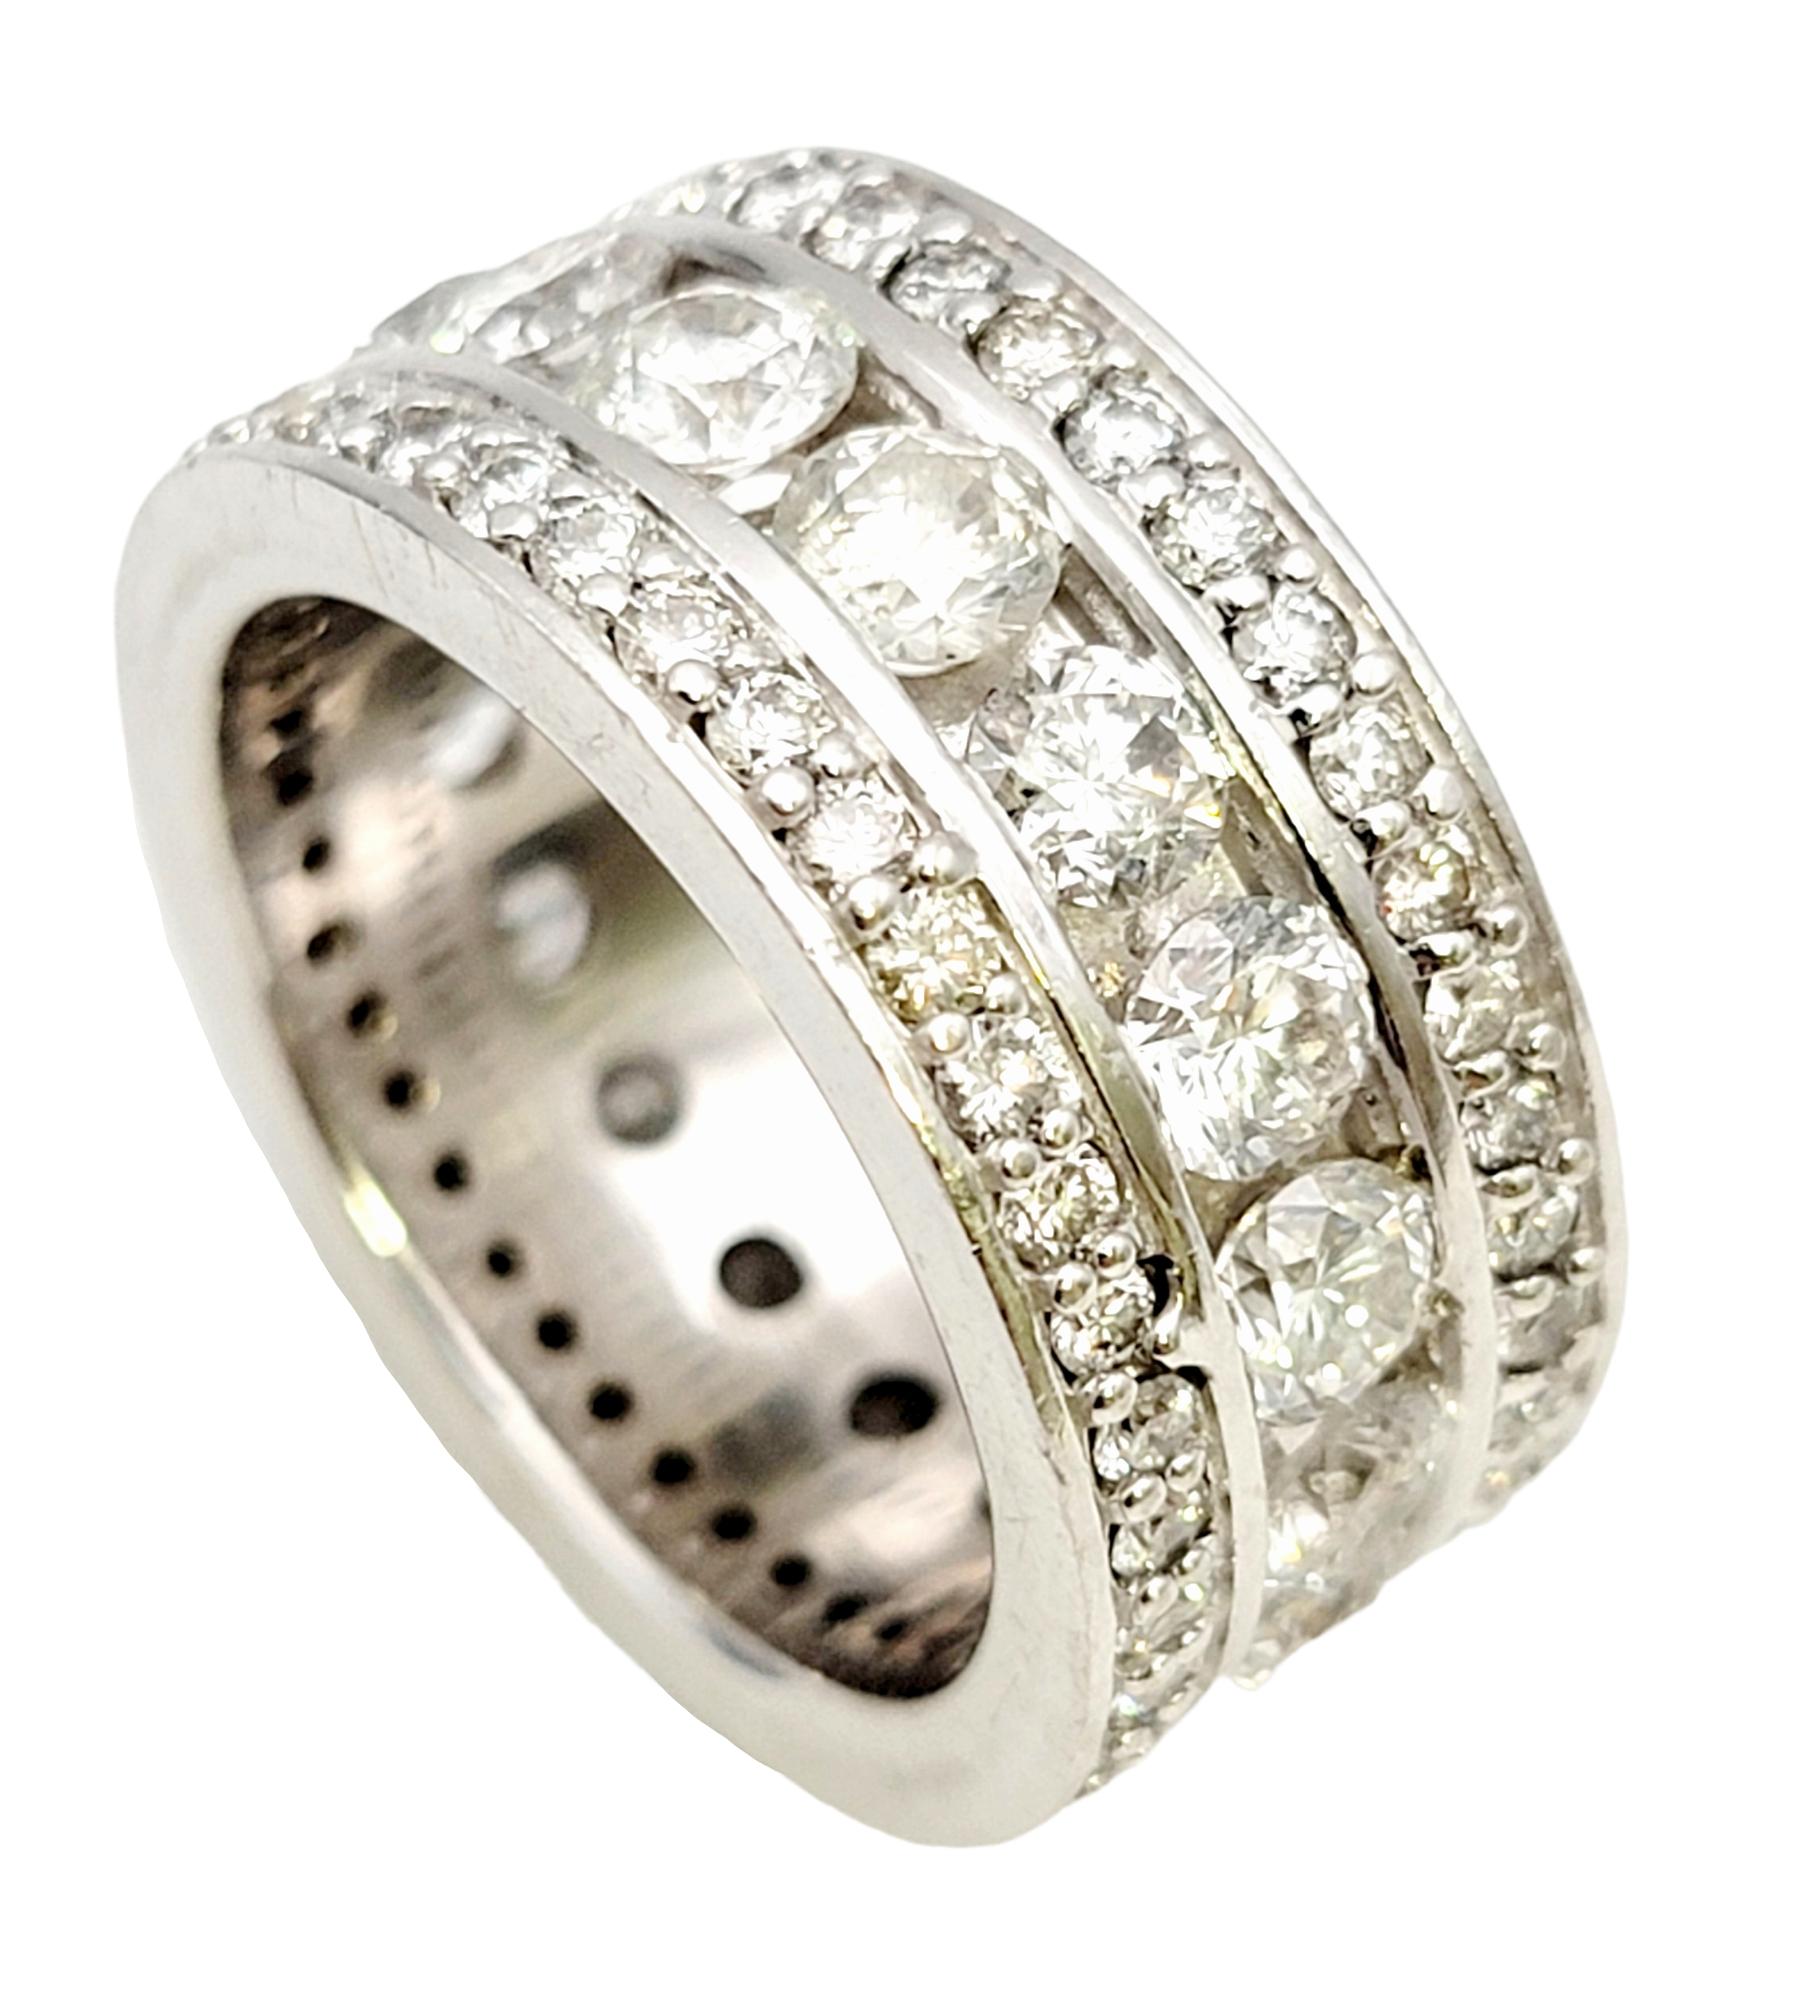 Ring size: 8.75

Absolutely spectacular multi-row diamond eternity band ring. This remarkable ring features a full circle of icy white round diamonds that truly shimmer and shine from every angle. The wider band style enhances the incredible